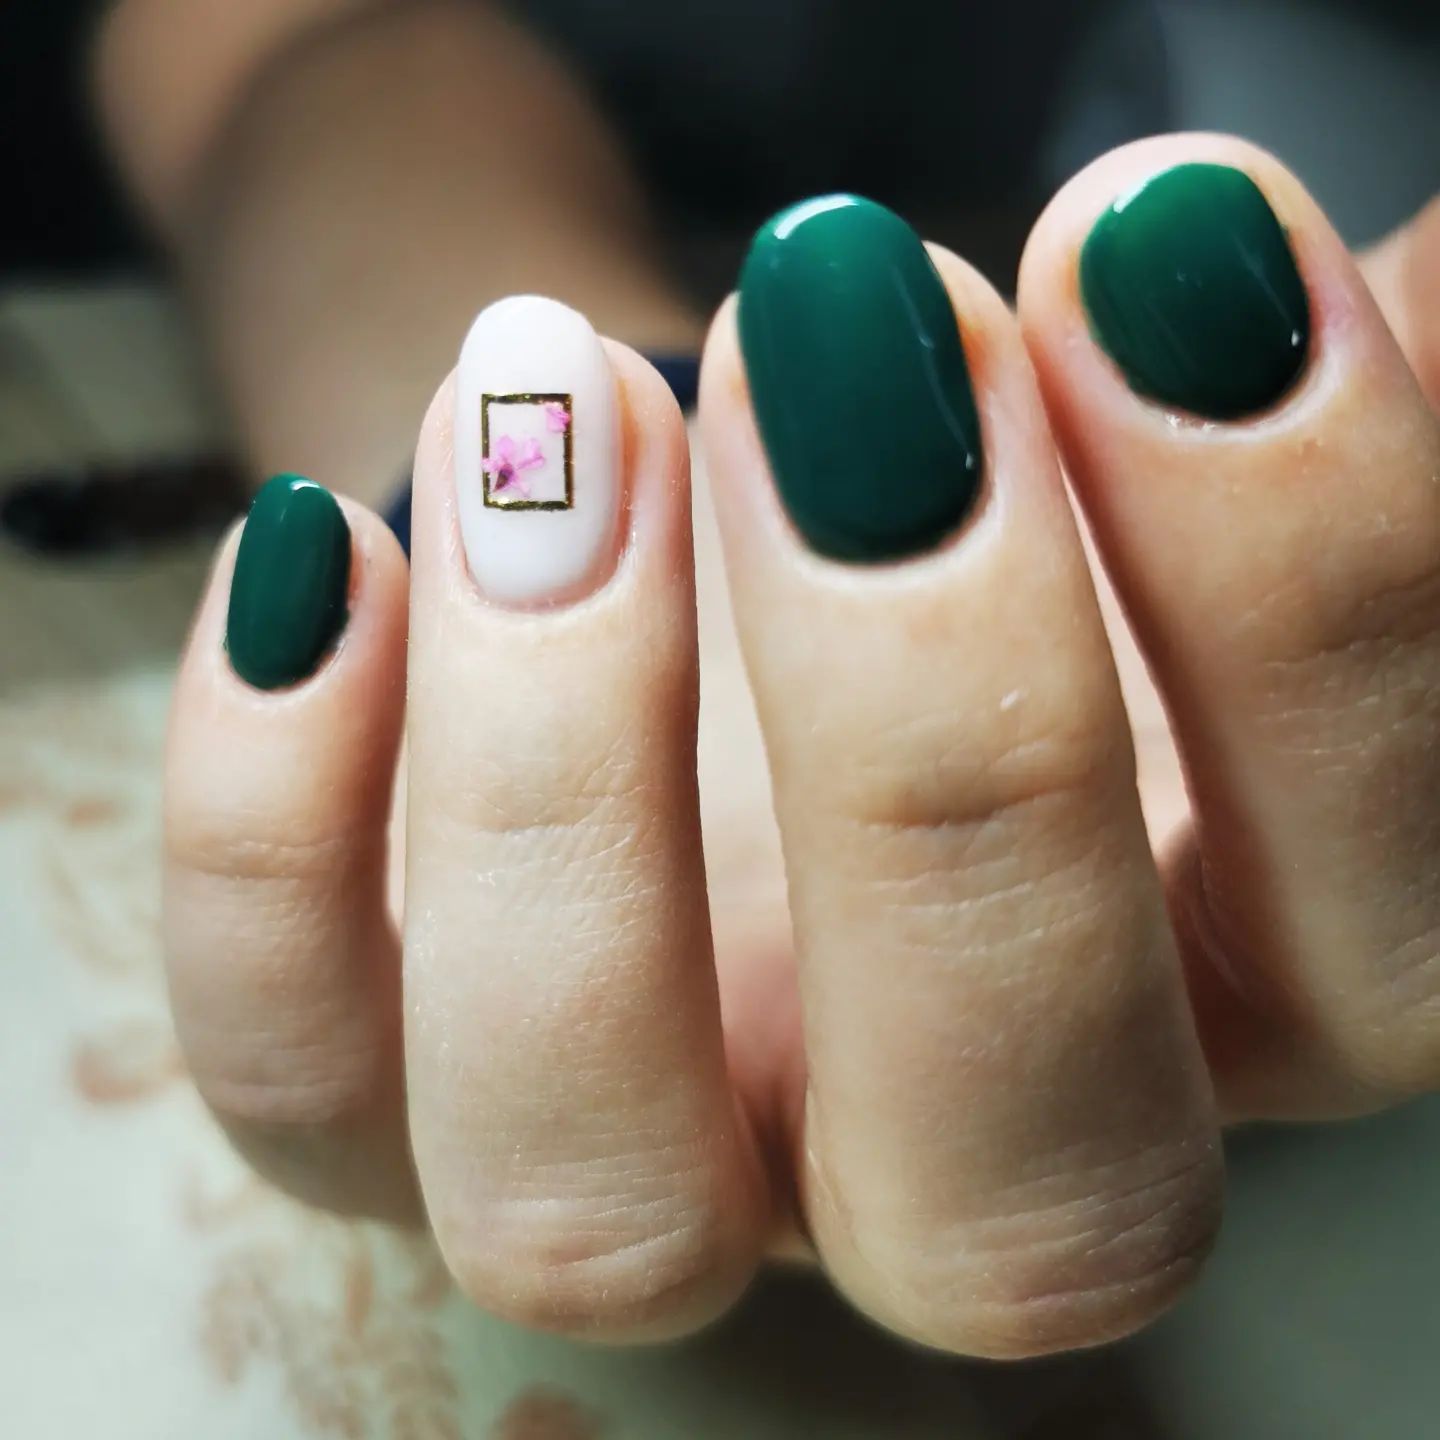 Dark green nails are simply nails that have been painted a dark shade of green. They are often associated with the punk subculture and are sometimes worn by people who want to express their individuality.